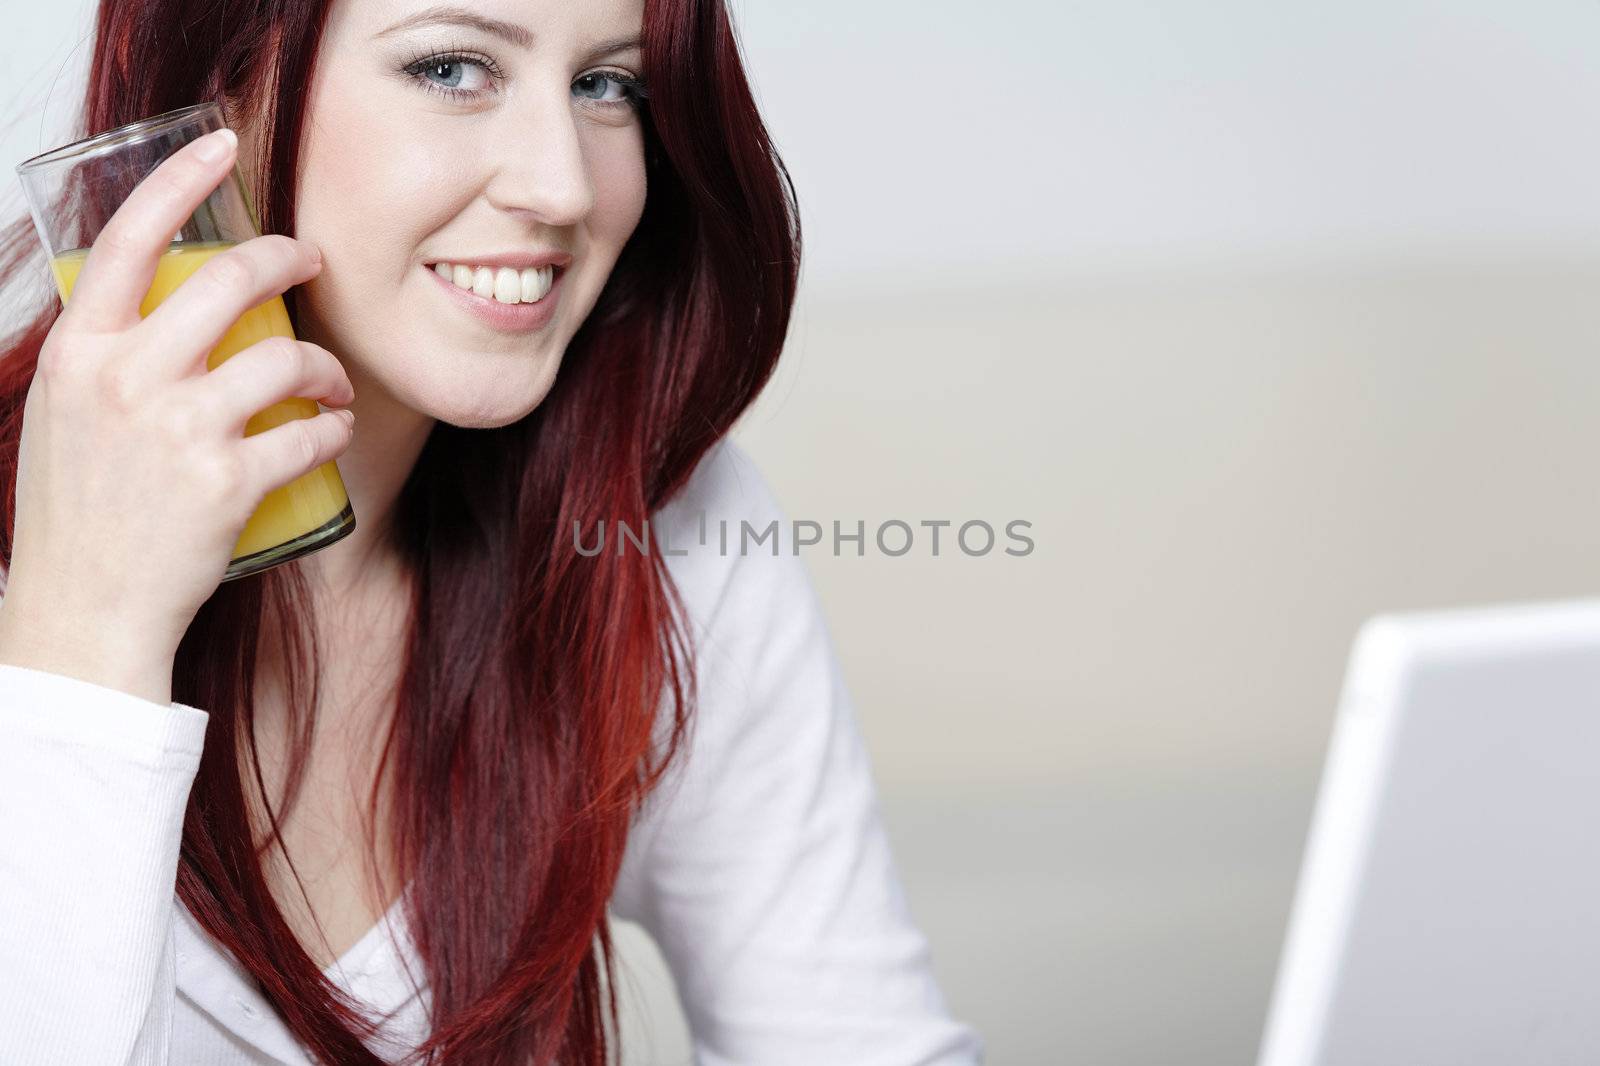 Beautiful young woman using a laptop at home with a fresh glass of Orange juice.